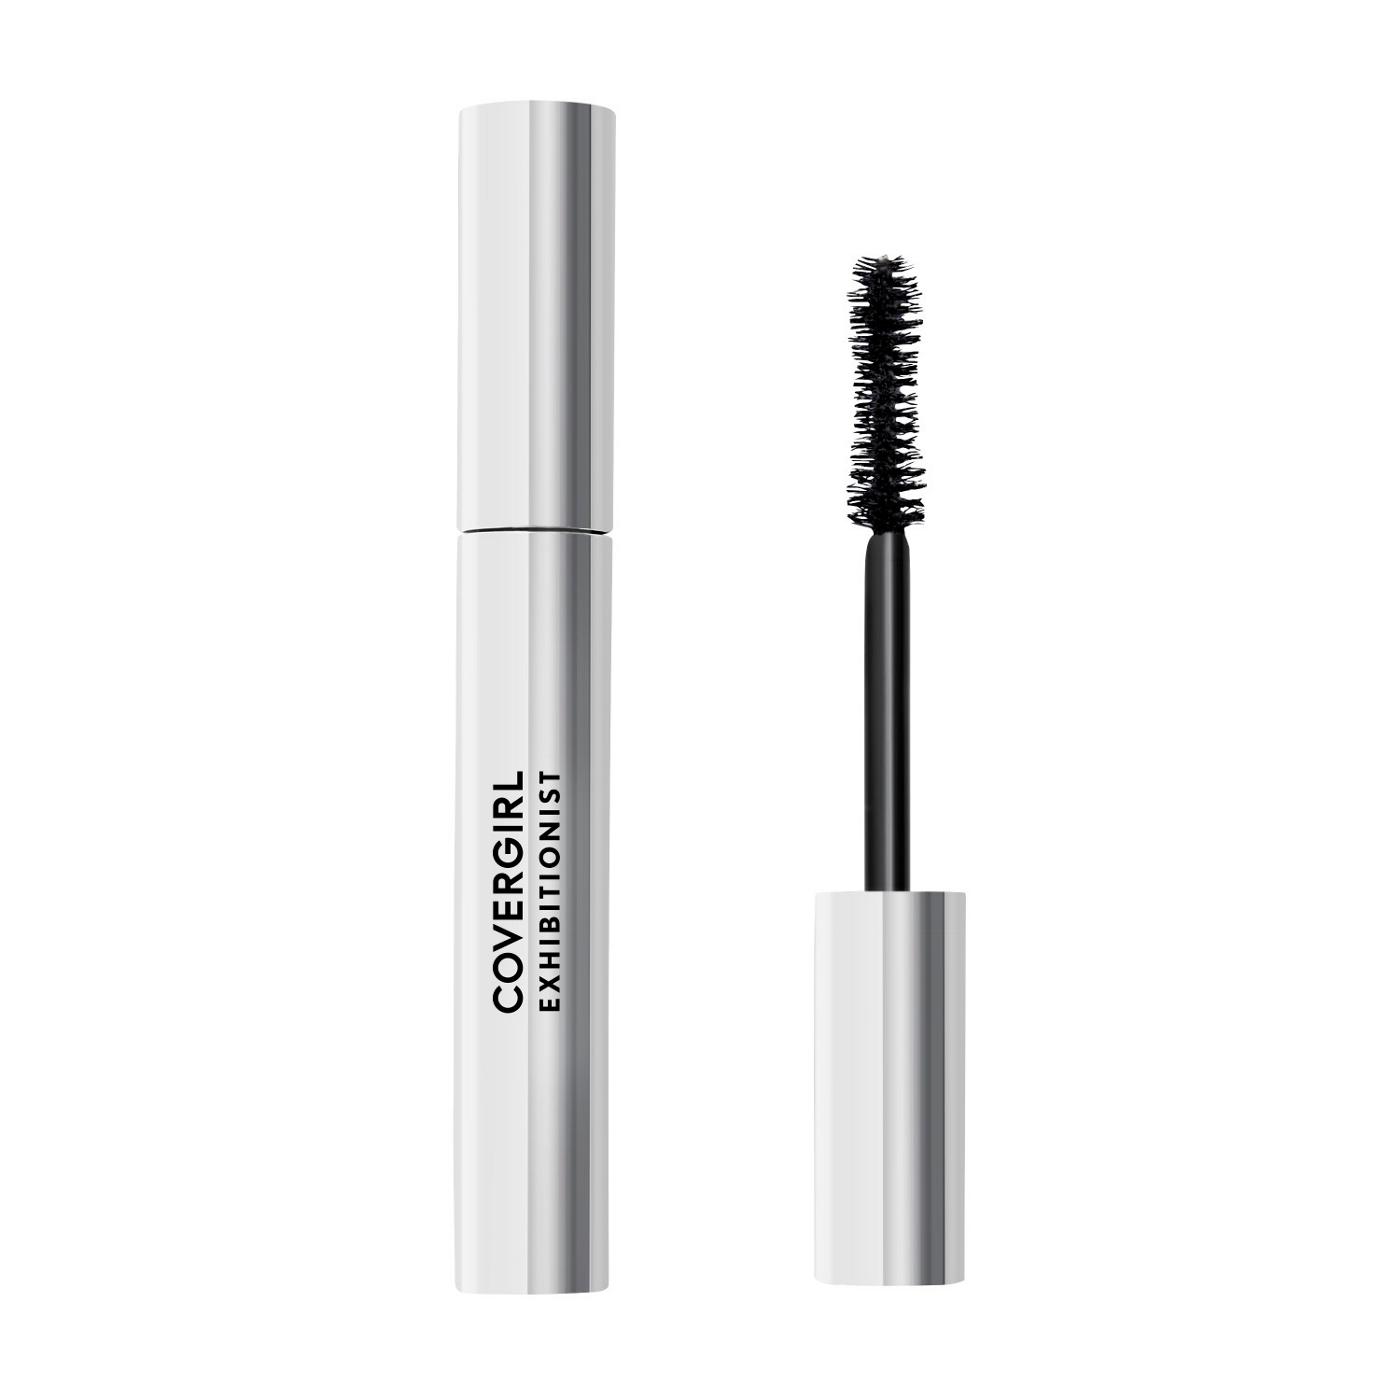 Covergirl Exhibitionist Mascara 800 Very Black; image 9 of 9